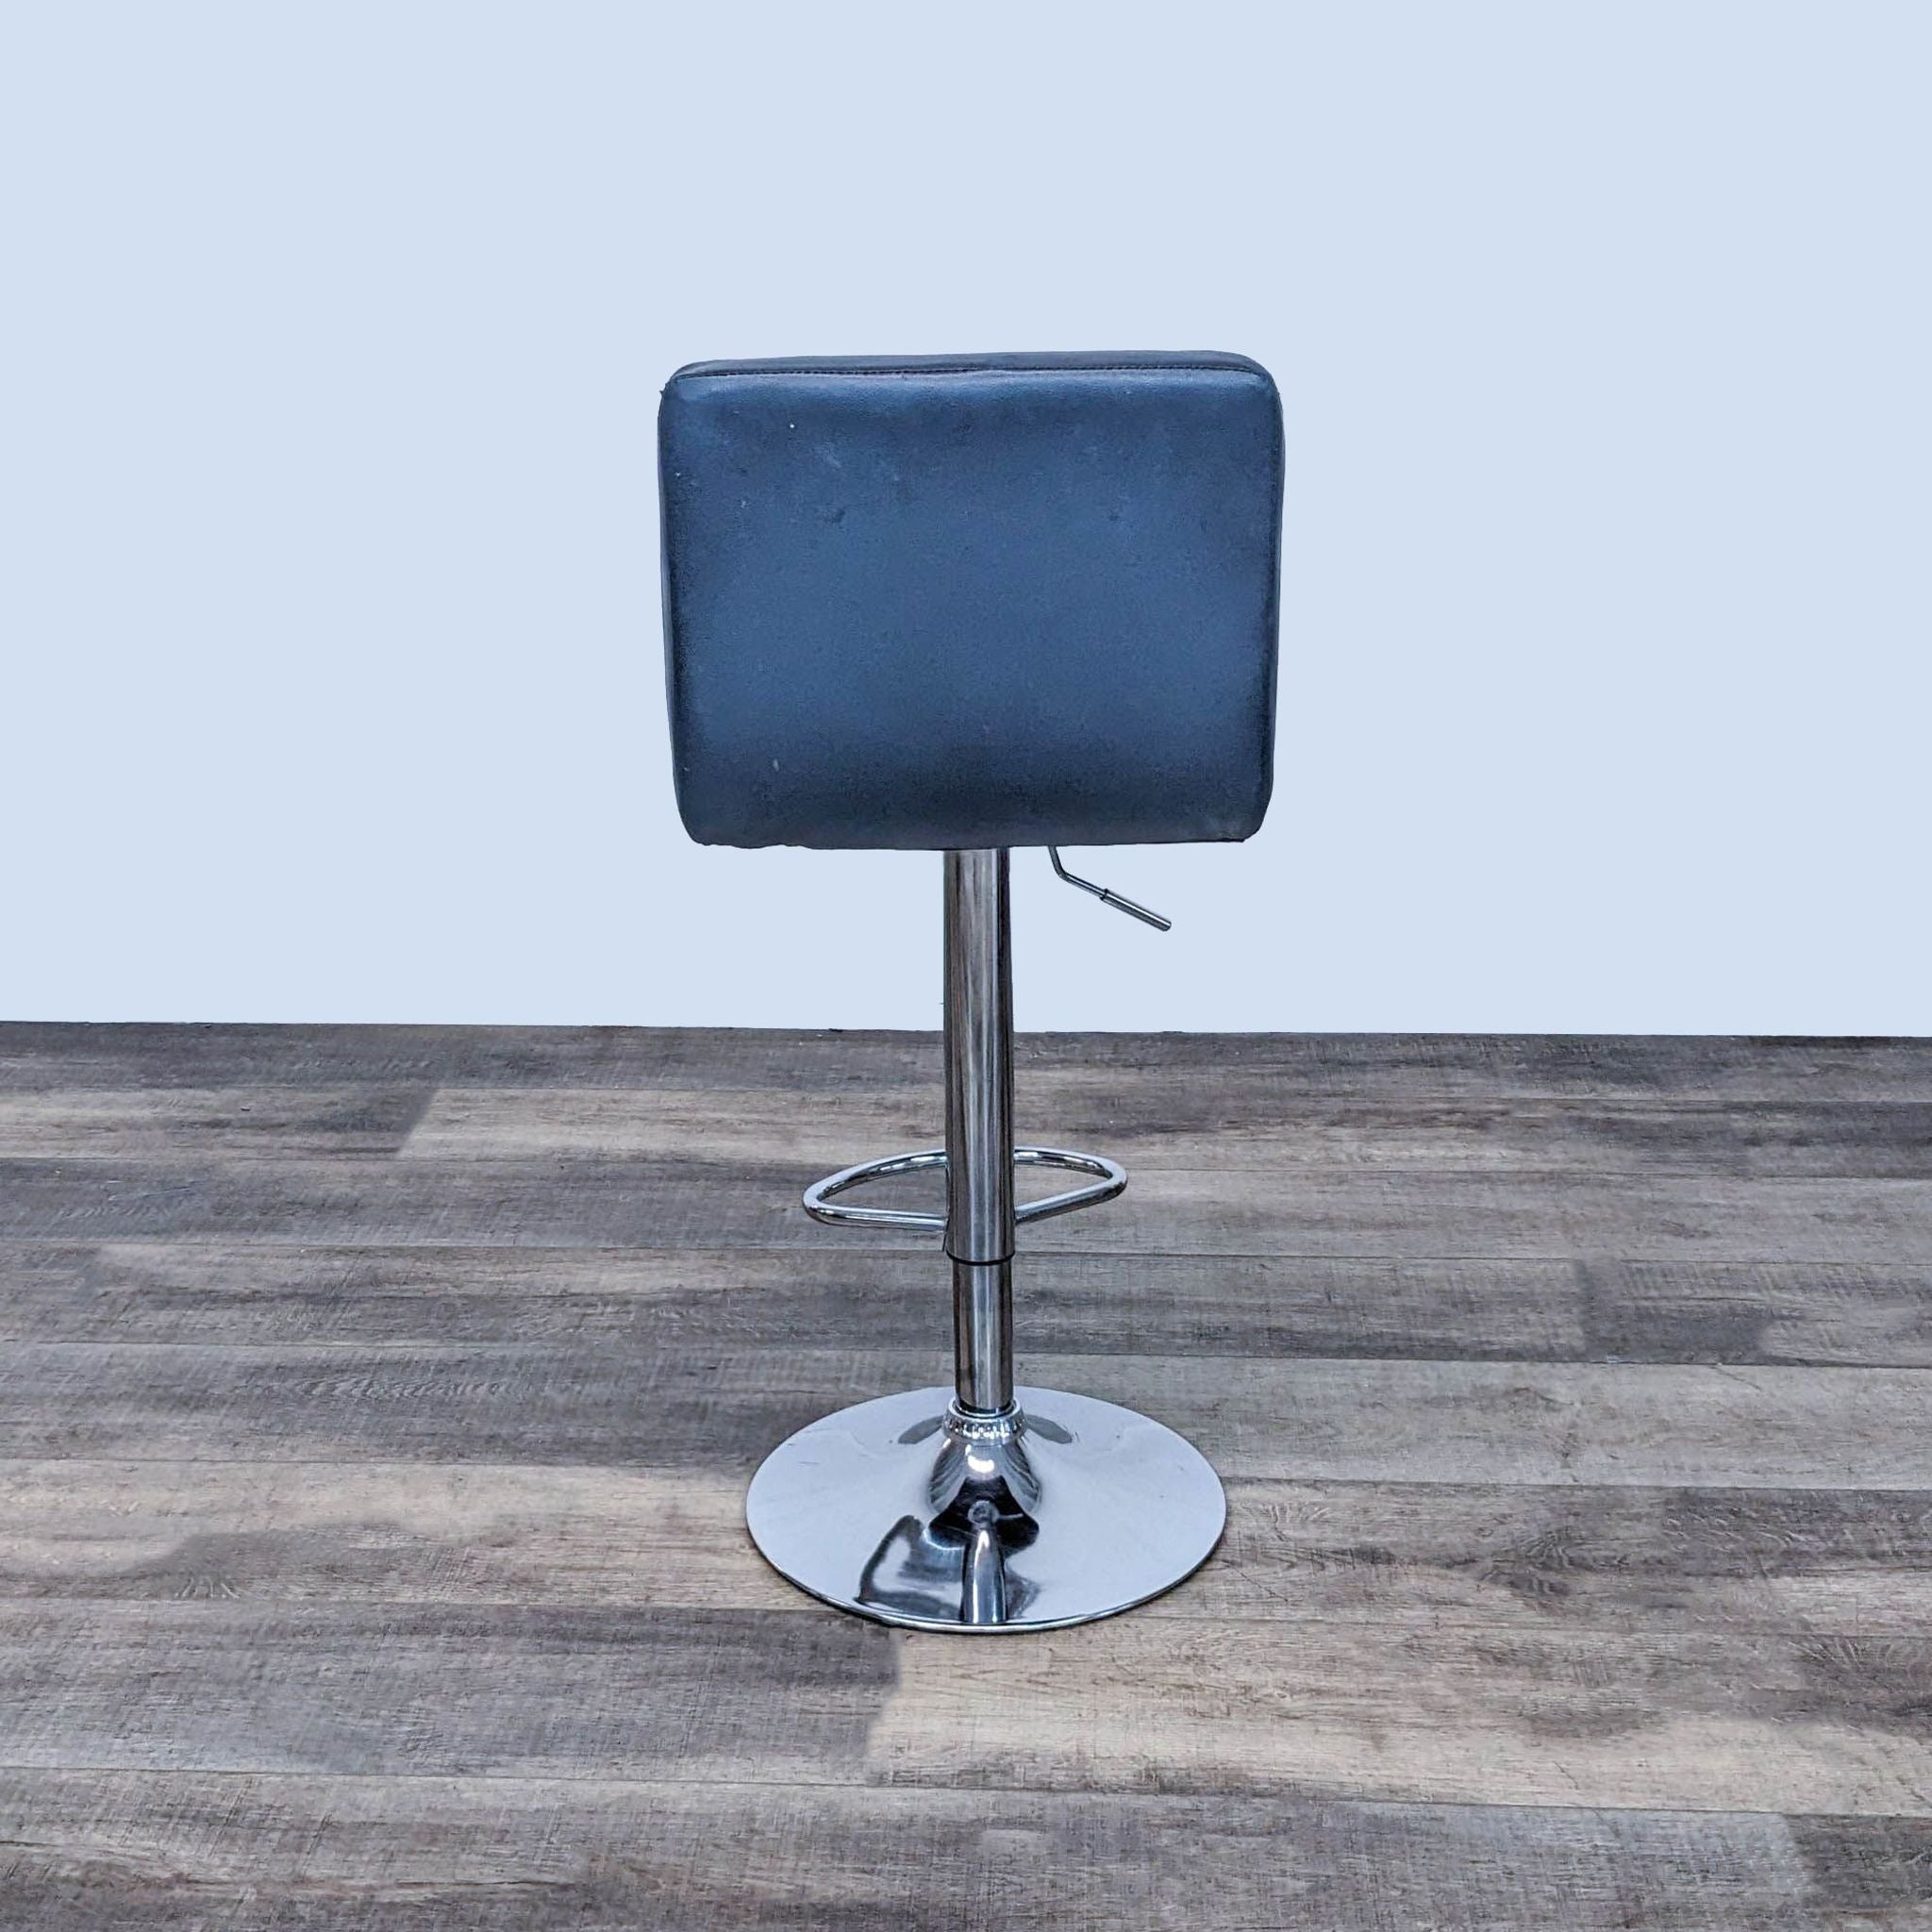 Close-up of Reperch black padded stool showcasing the leather texture and stitching, with chrome base visible below.